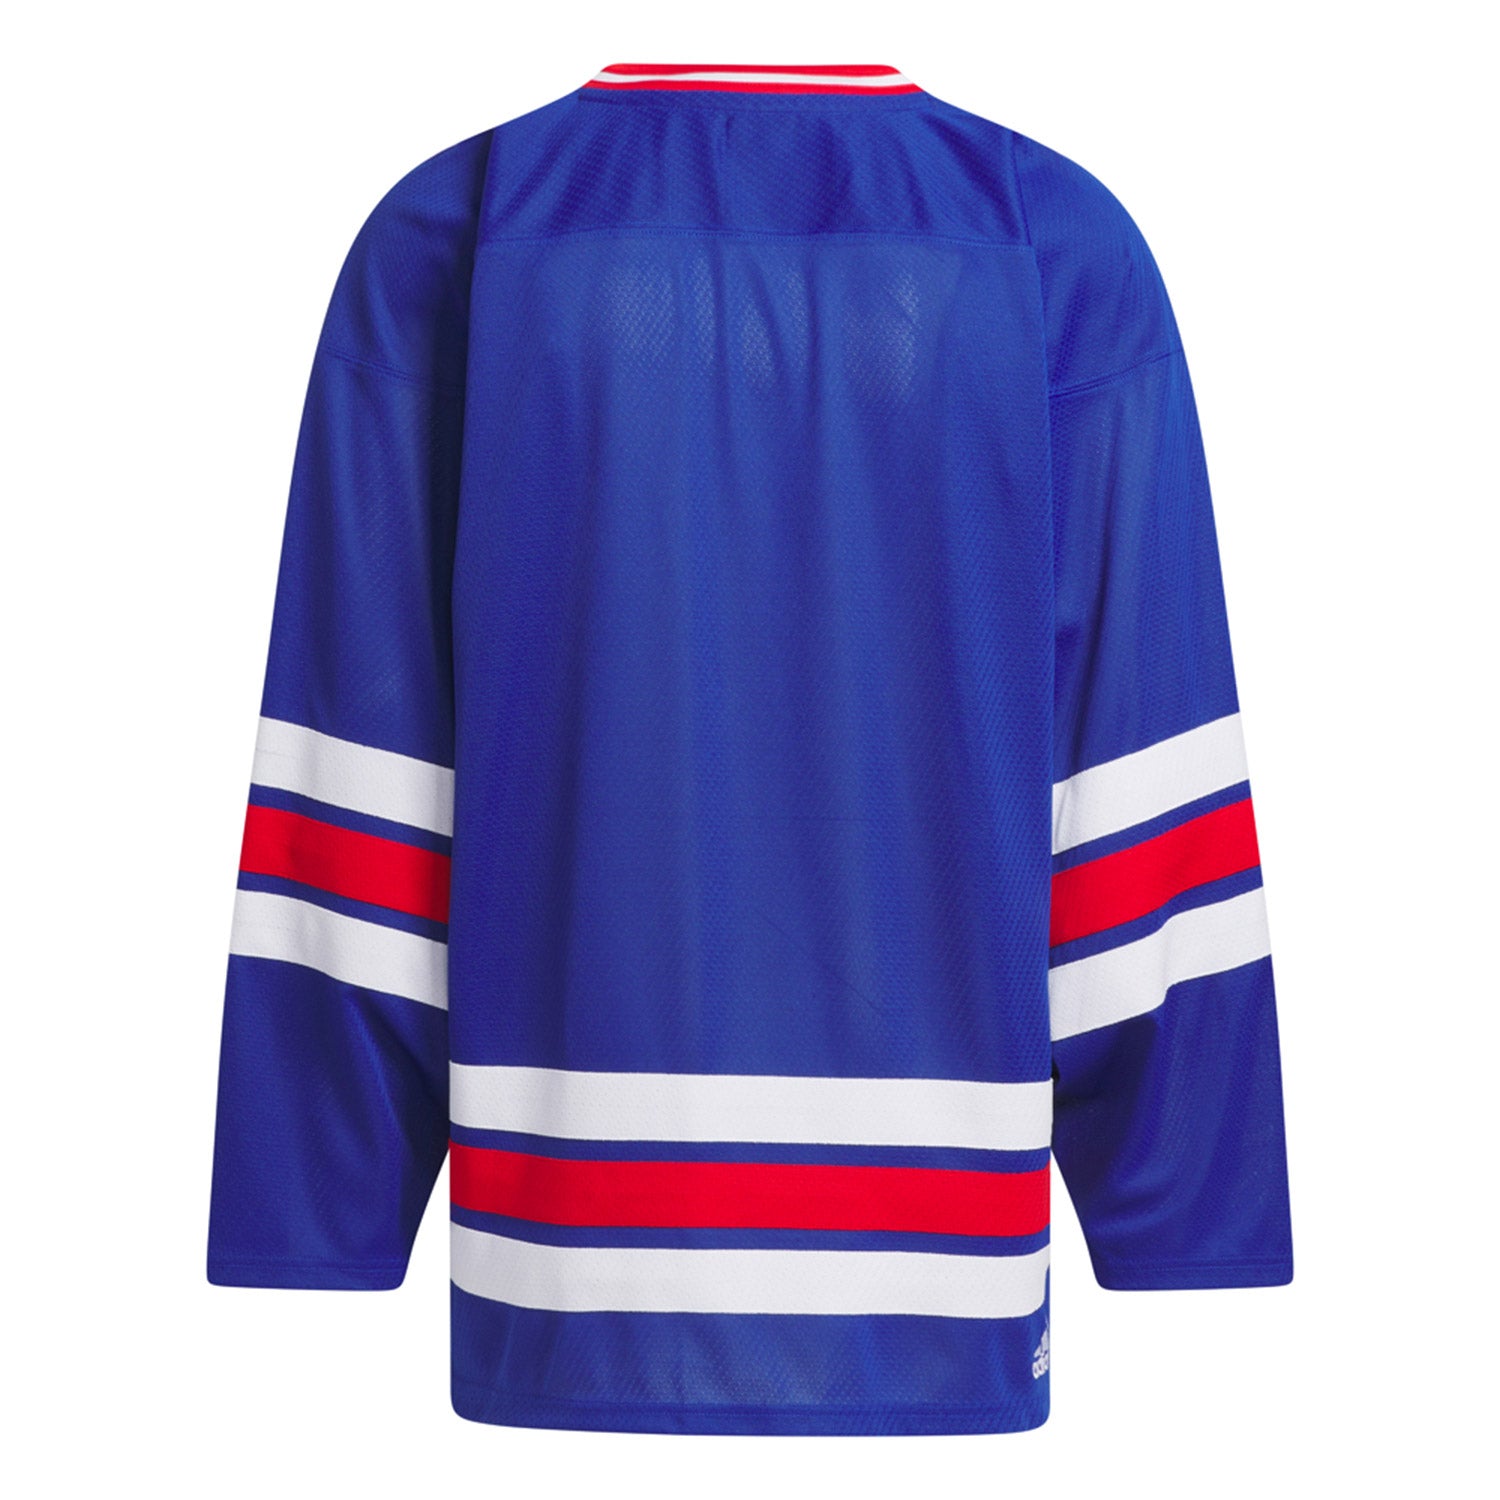 Adidas Rangers 79 Team Classic Blank Jersey - In Blue - Back View